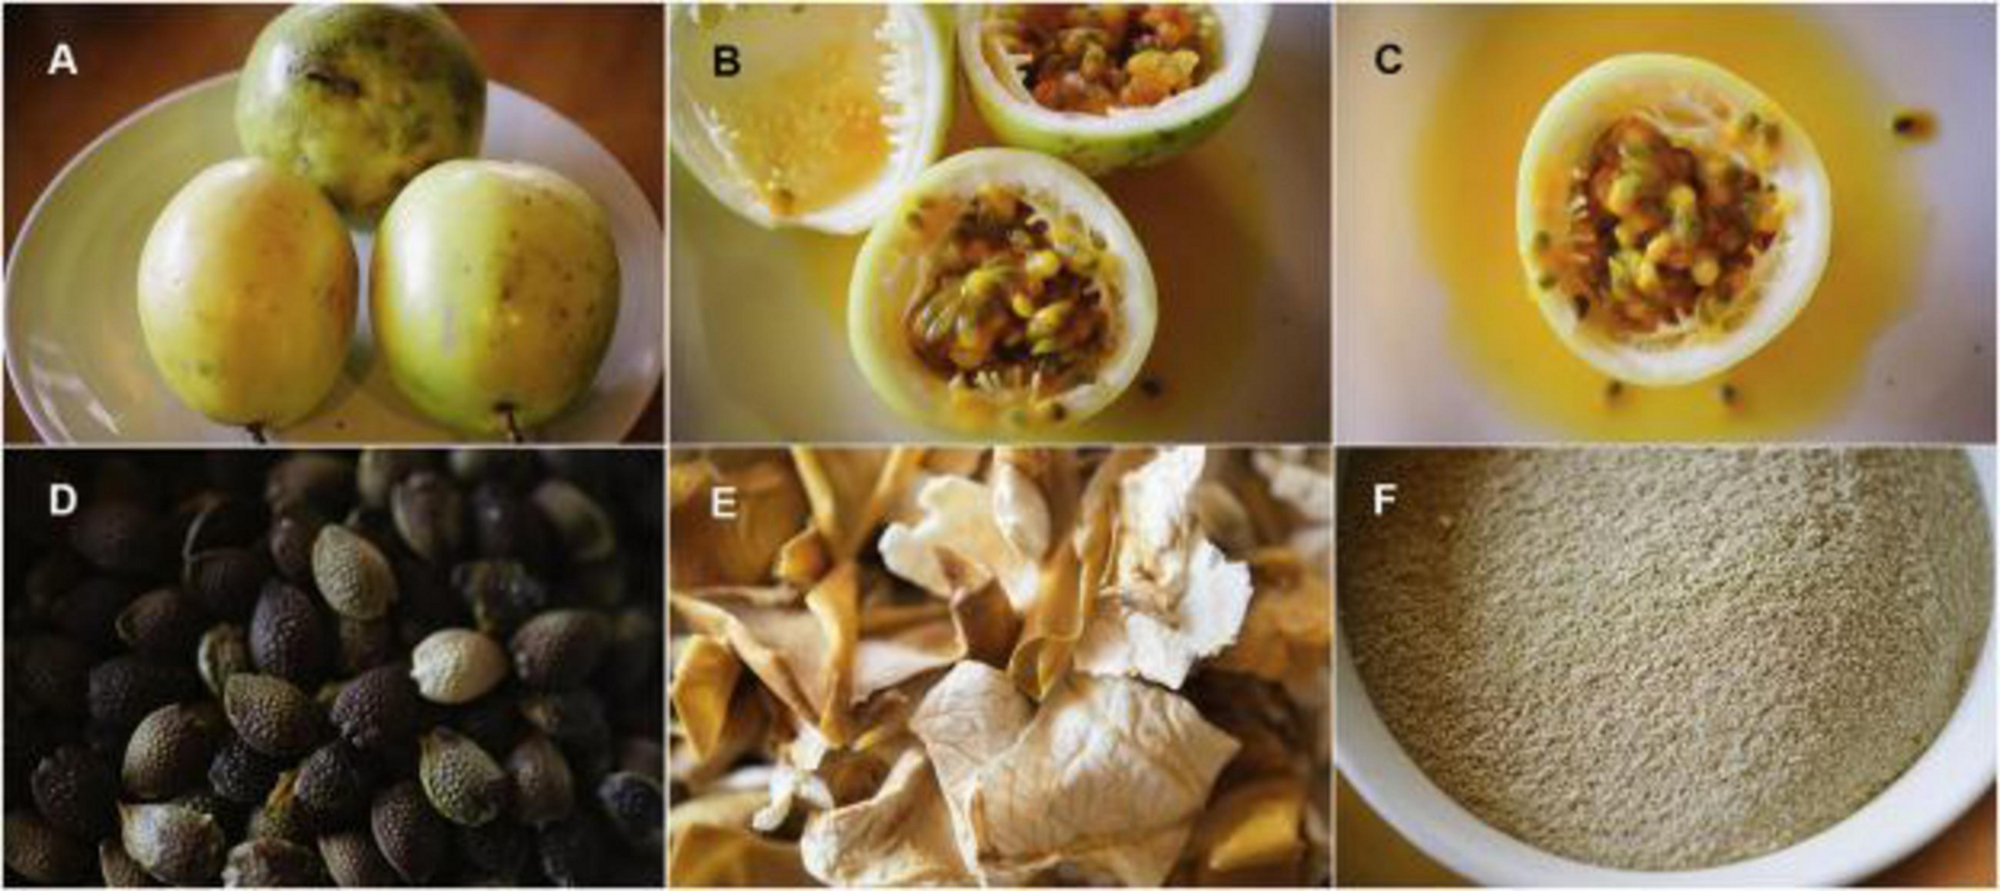 (A): Whole yellow passion fruit; (B; C): Halves of yellow passion fruit: rinds, pulp and seeds. Source: Corrêa et al. (2016)